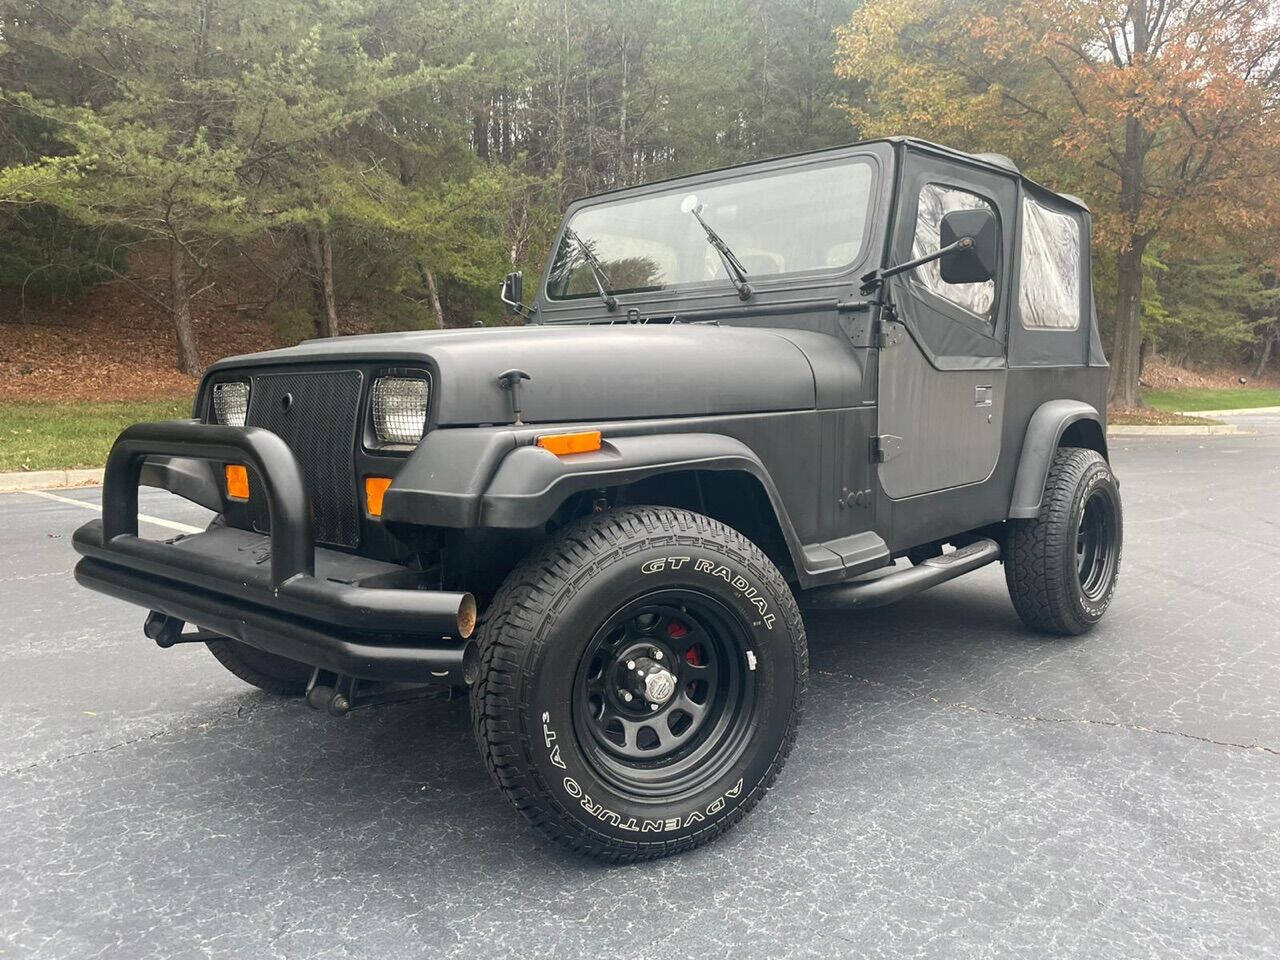 1989 Jeep Wrangler For Sale ®